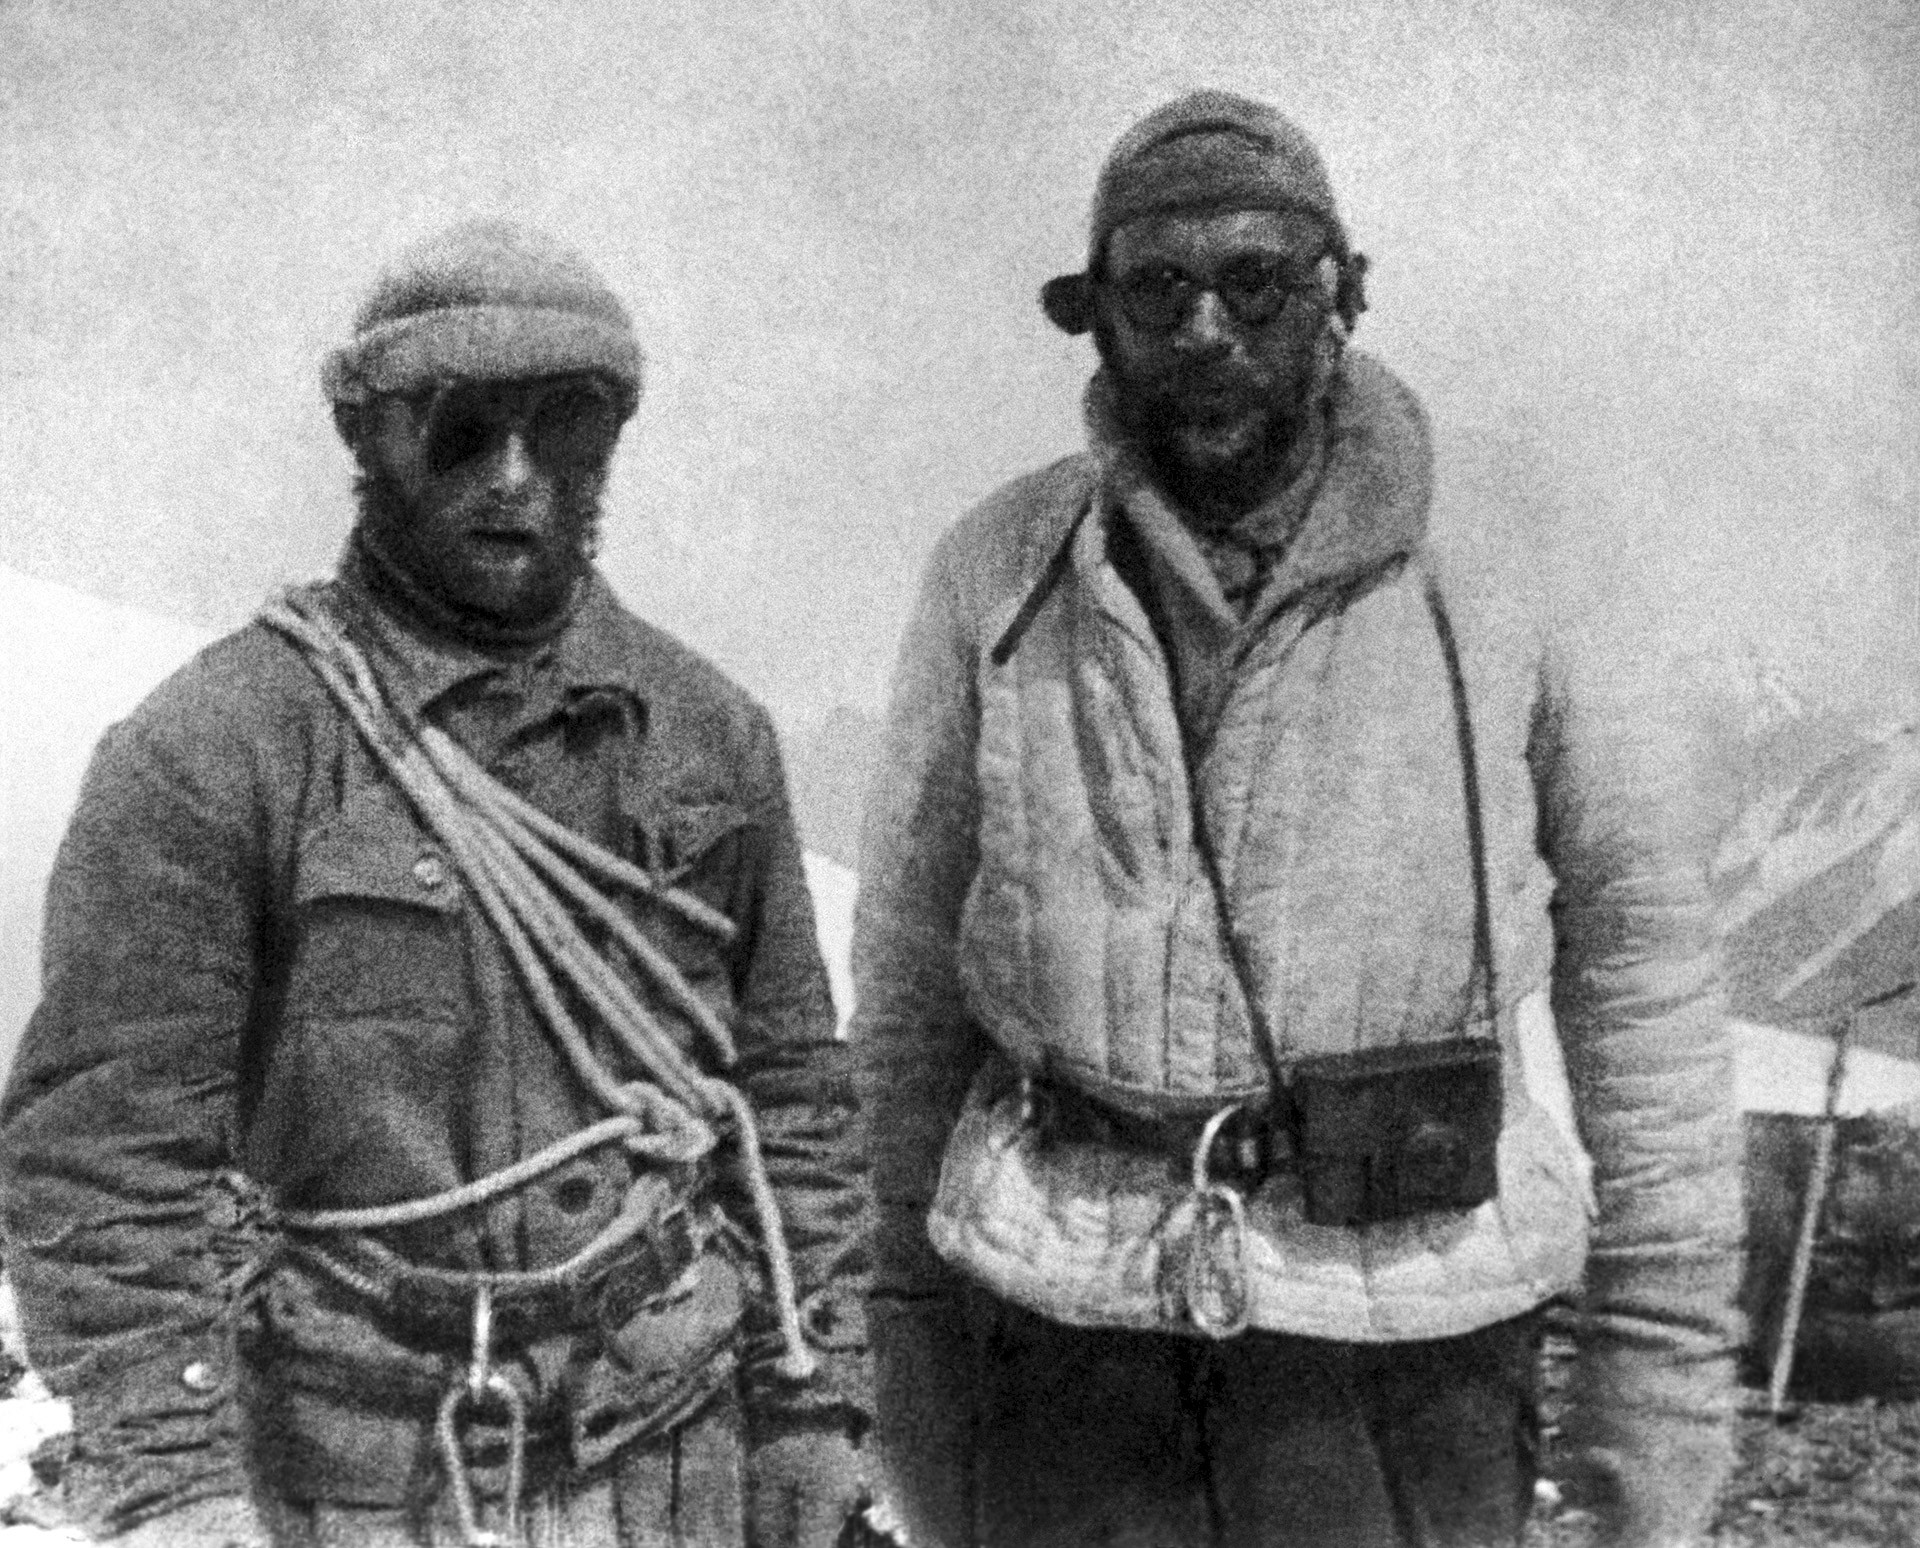 Eugene Abalakov (left) and Nikolay Gorbunov (right), members of the Squad No. 29 which began a journey to climb Stalin Peak in August 1933.